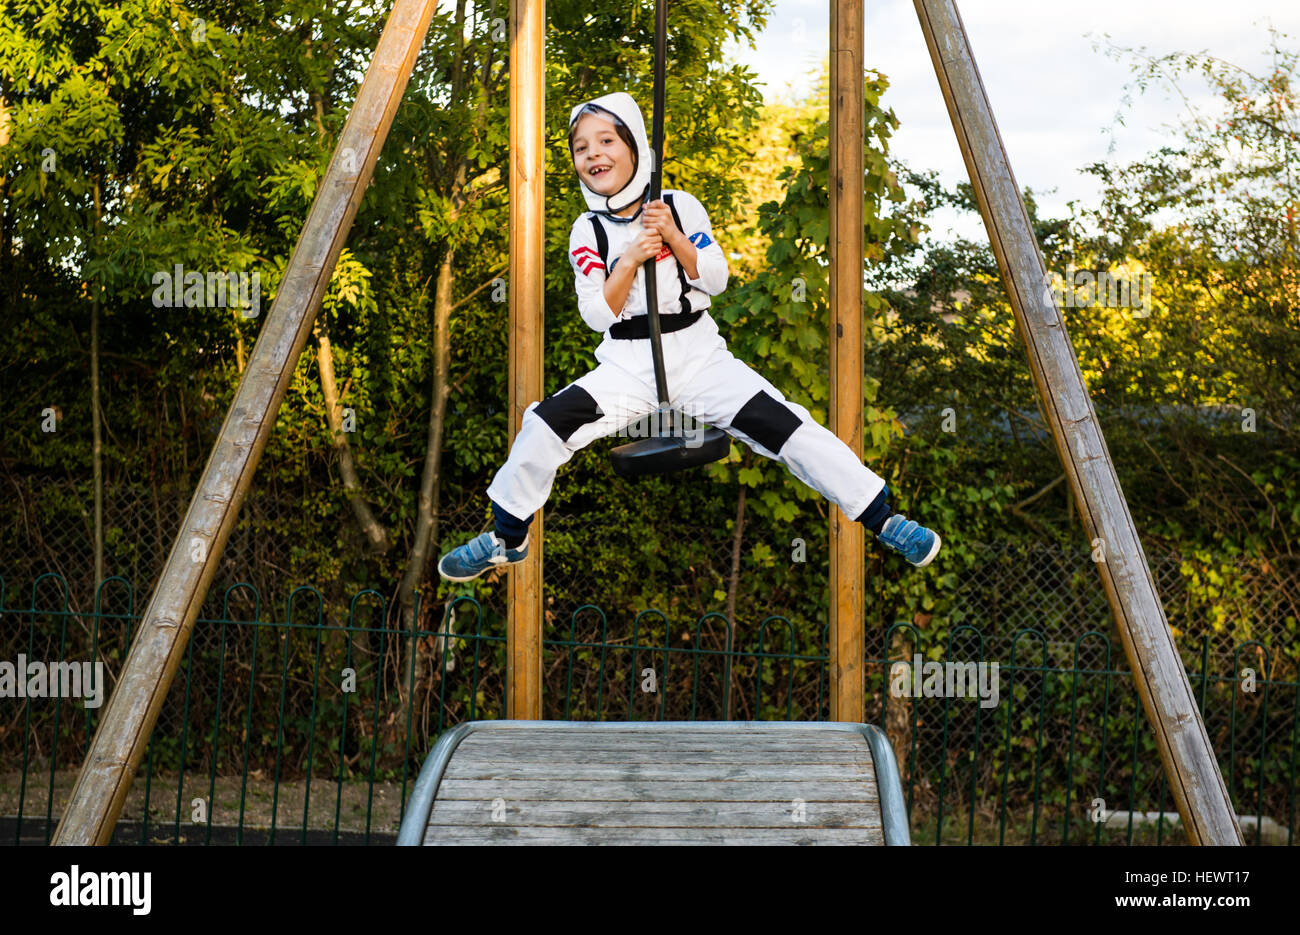 Portrait of boy in astronaut costume riding on playground zip wire Stock Photo